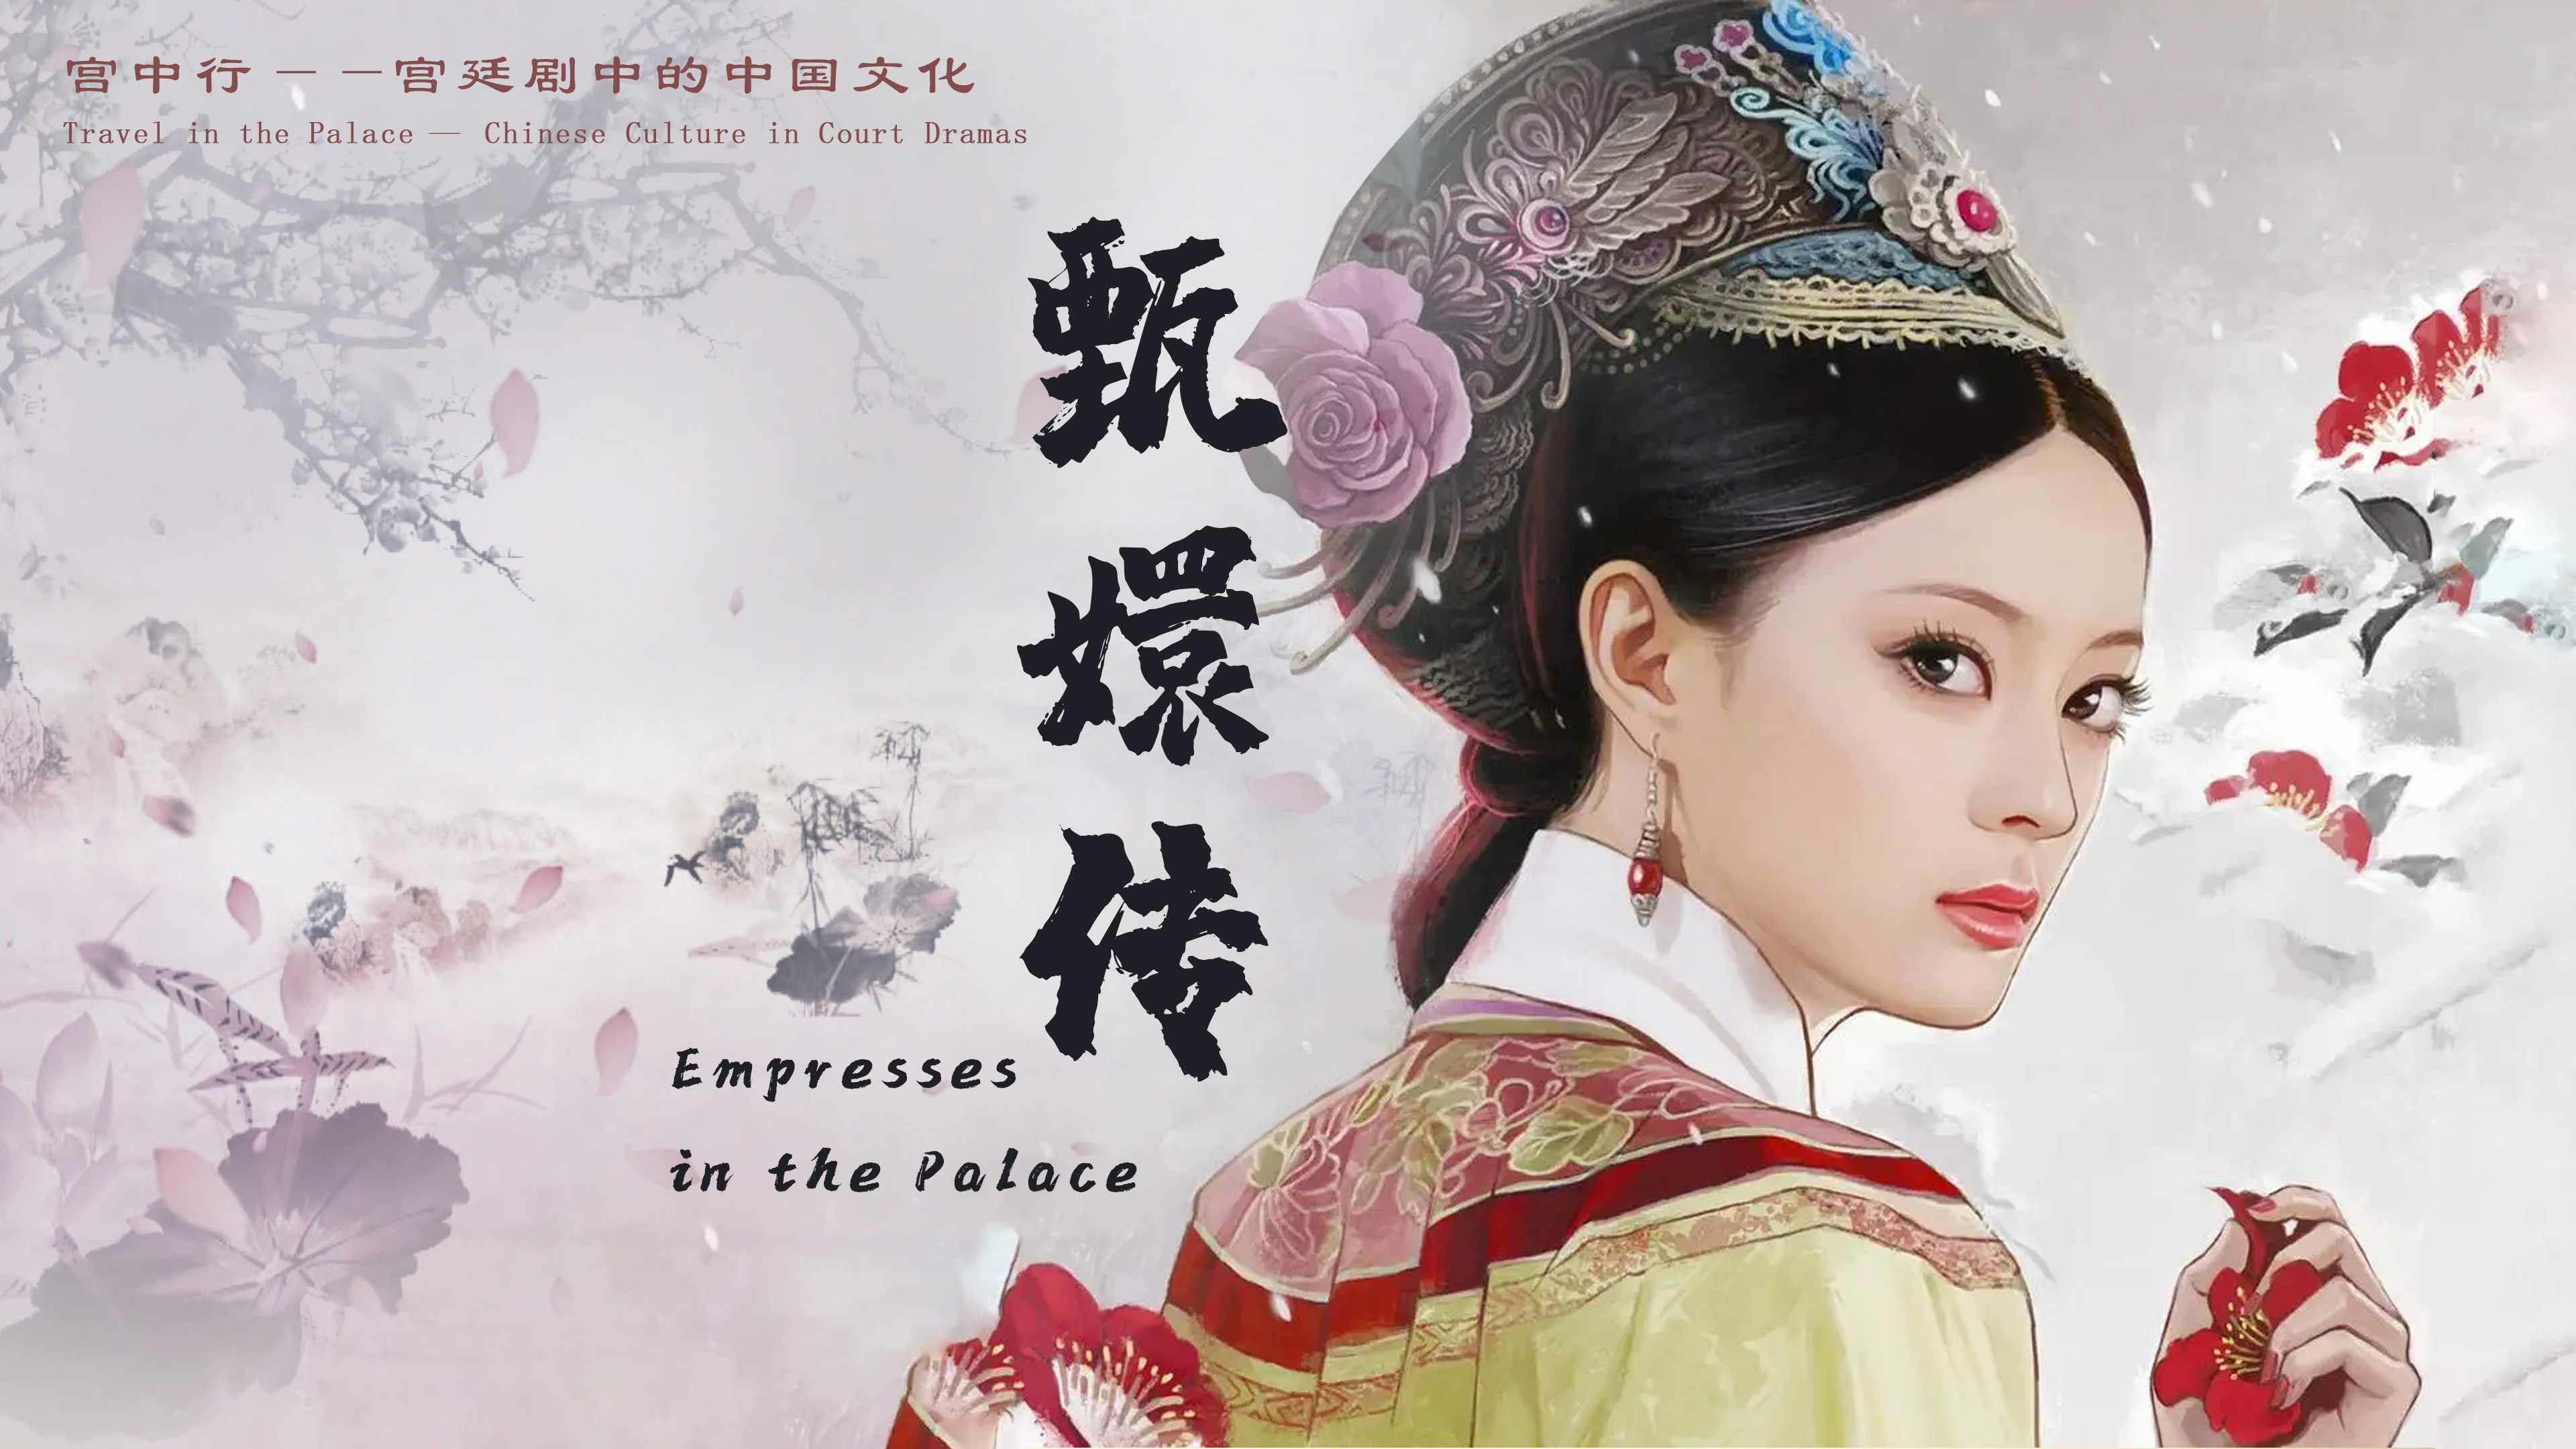 Travel in the Palace - Chinese Culture in Court Dramas: Explanation of relevant cultural contents of Empresses in the Palace